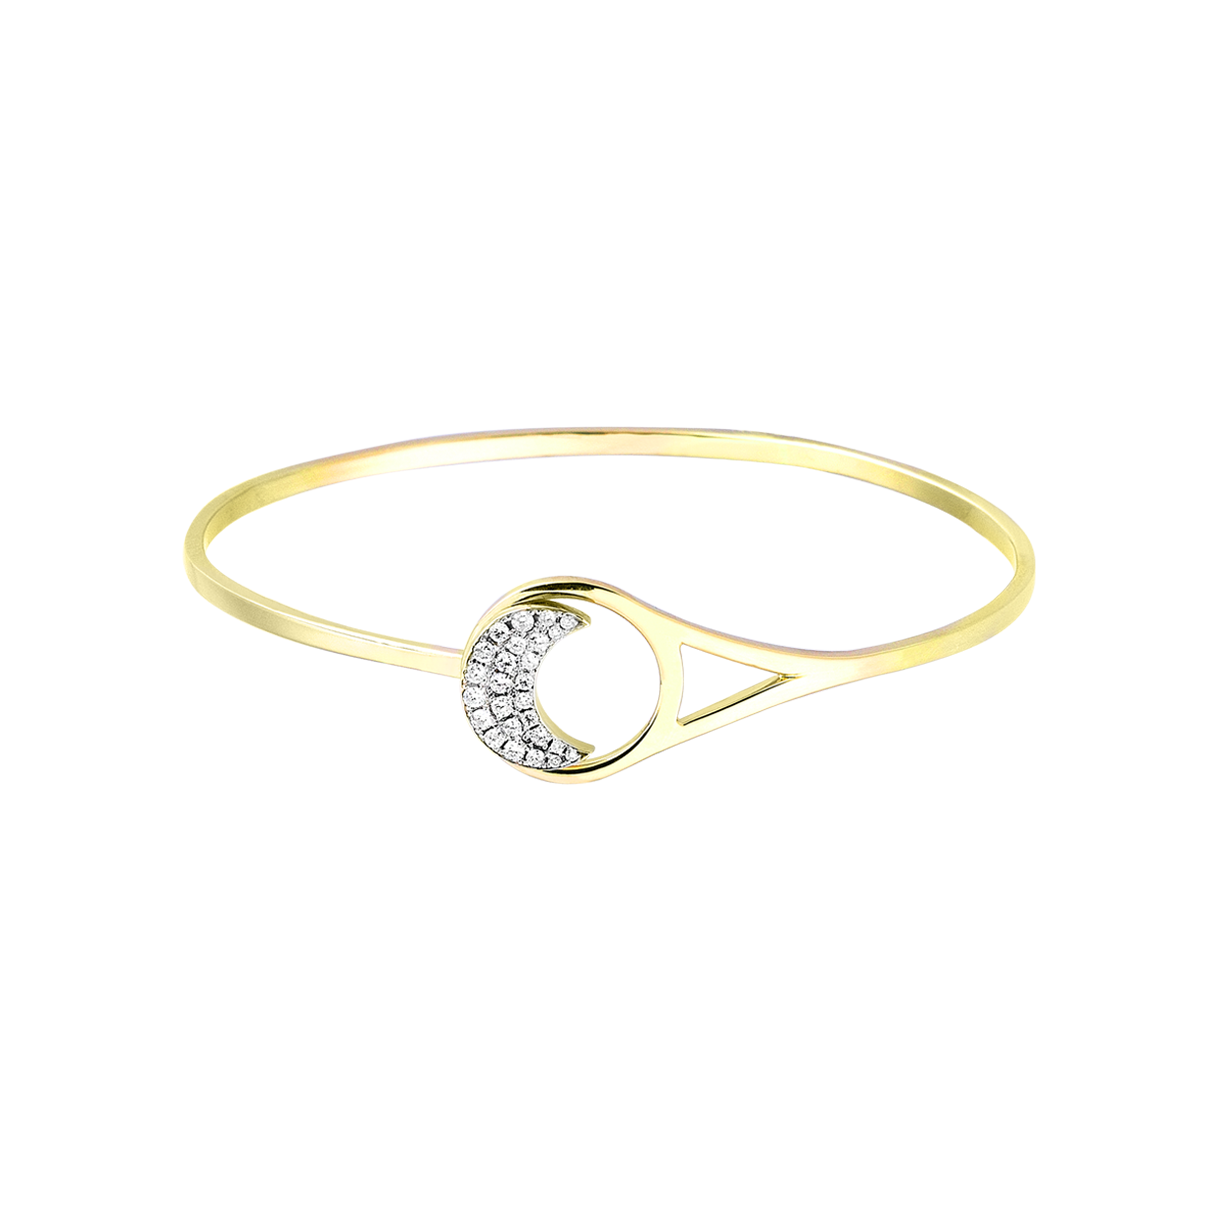 Nite Cuff in Yellow Gold - Her Story Shop